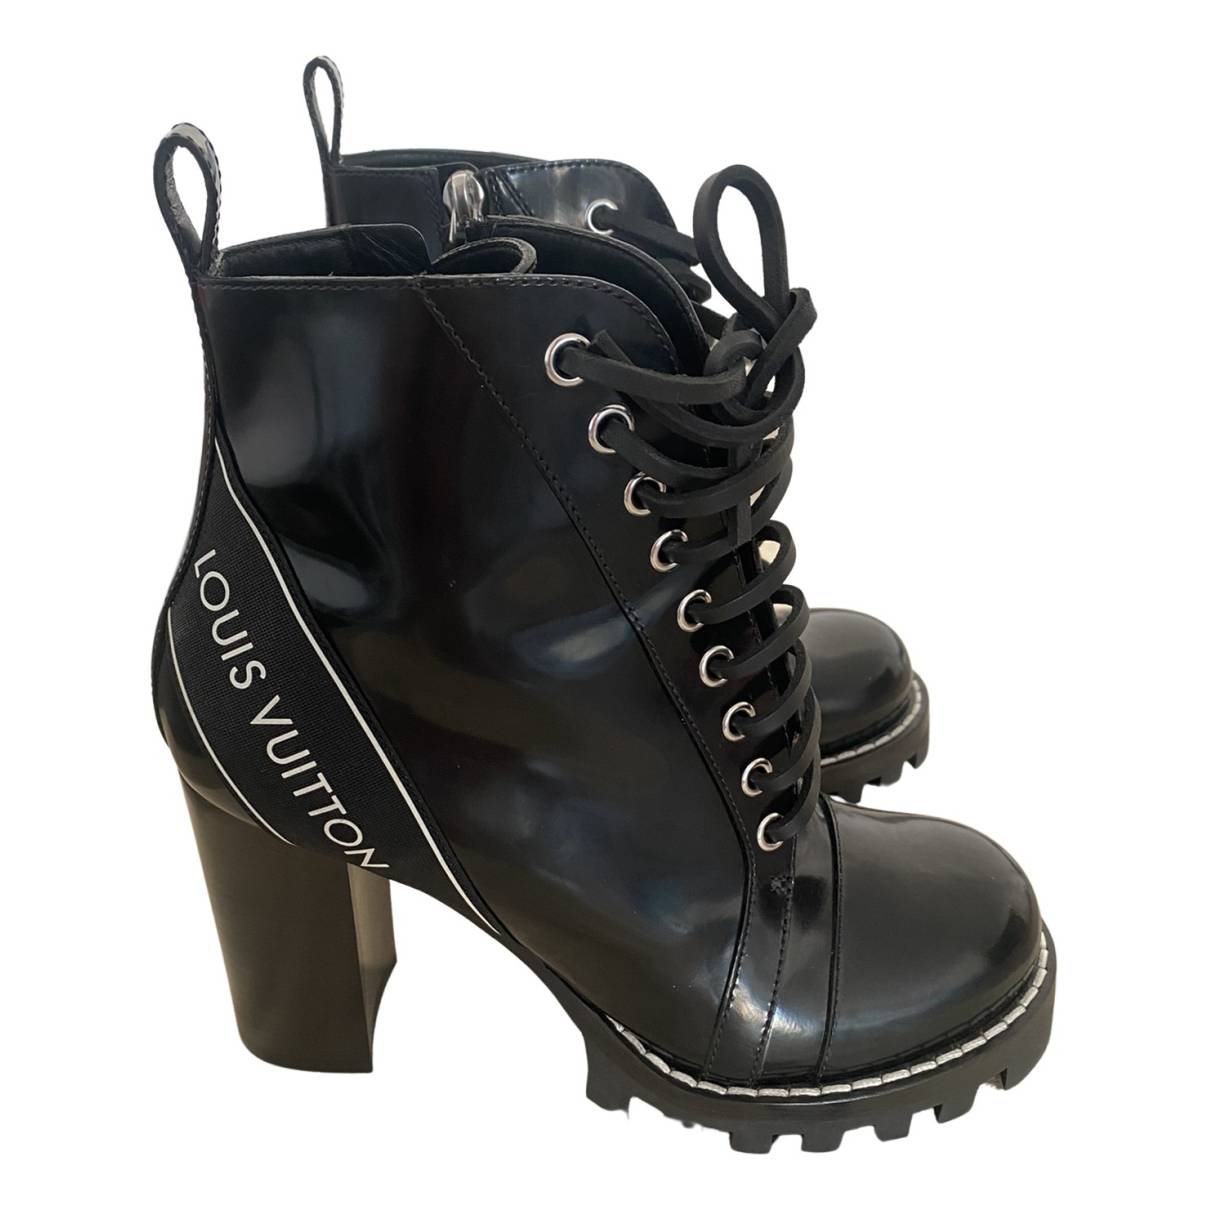 Star Trail Ankle Boot - Louis Vuitton Leather Boot for Women